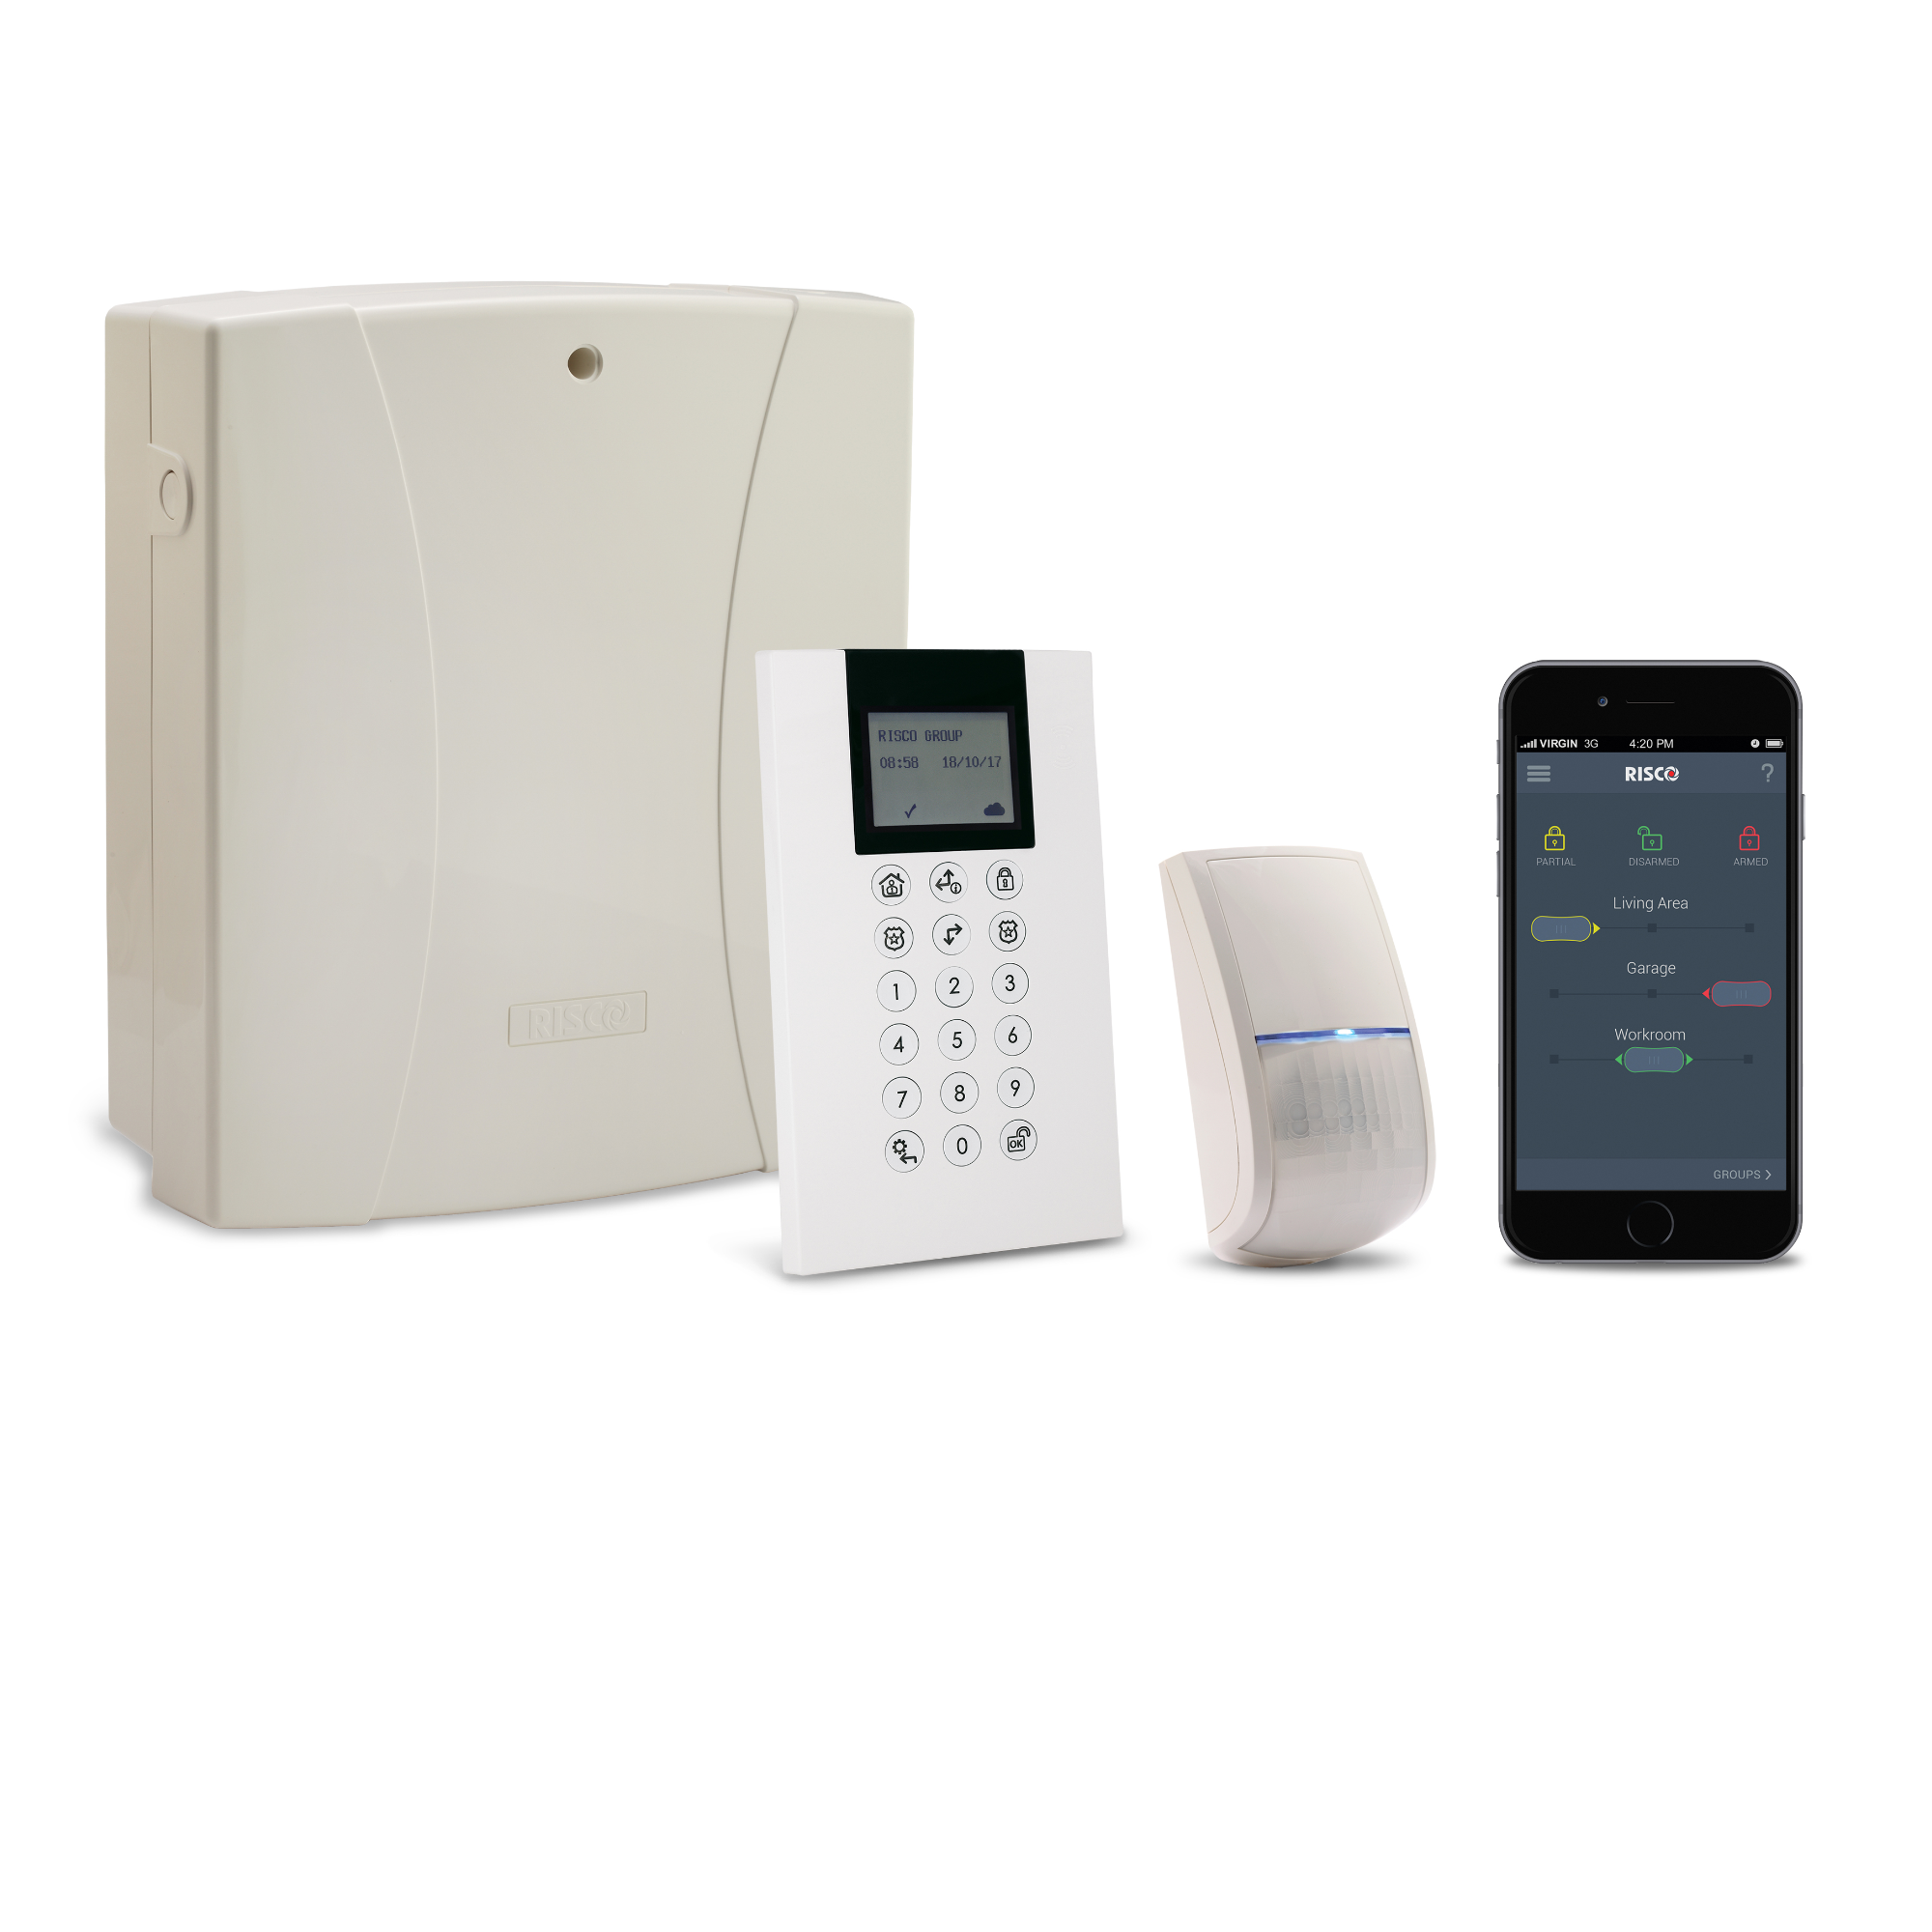 Risco Wireless Devices - LightSYS Alarm Solution - Alliance Wholesale